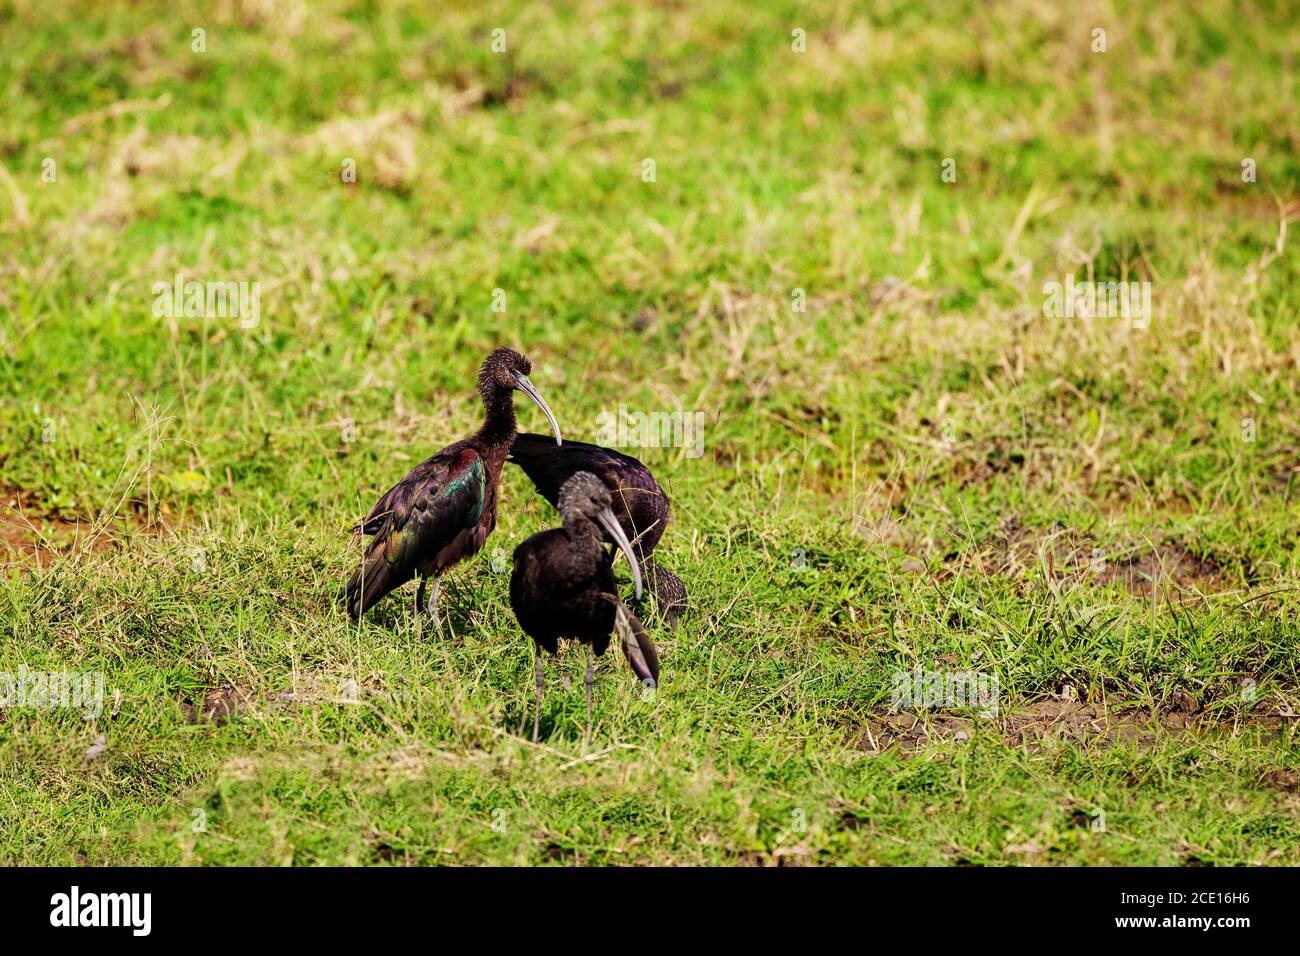 The glossy ibis is a wading bird it's family Threskiornithidae in wildness of African landscape in Kenya Stock Photo